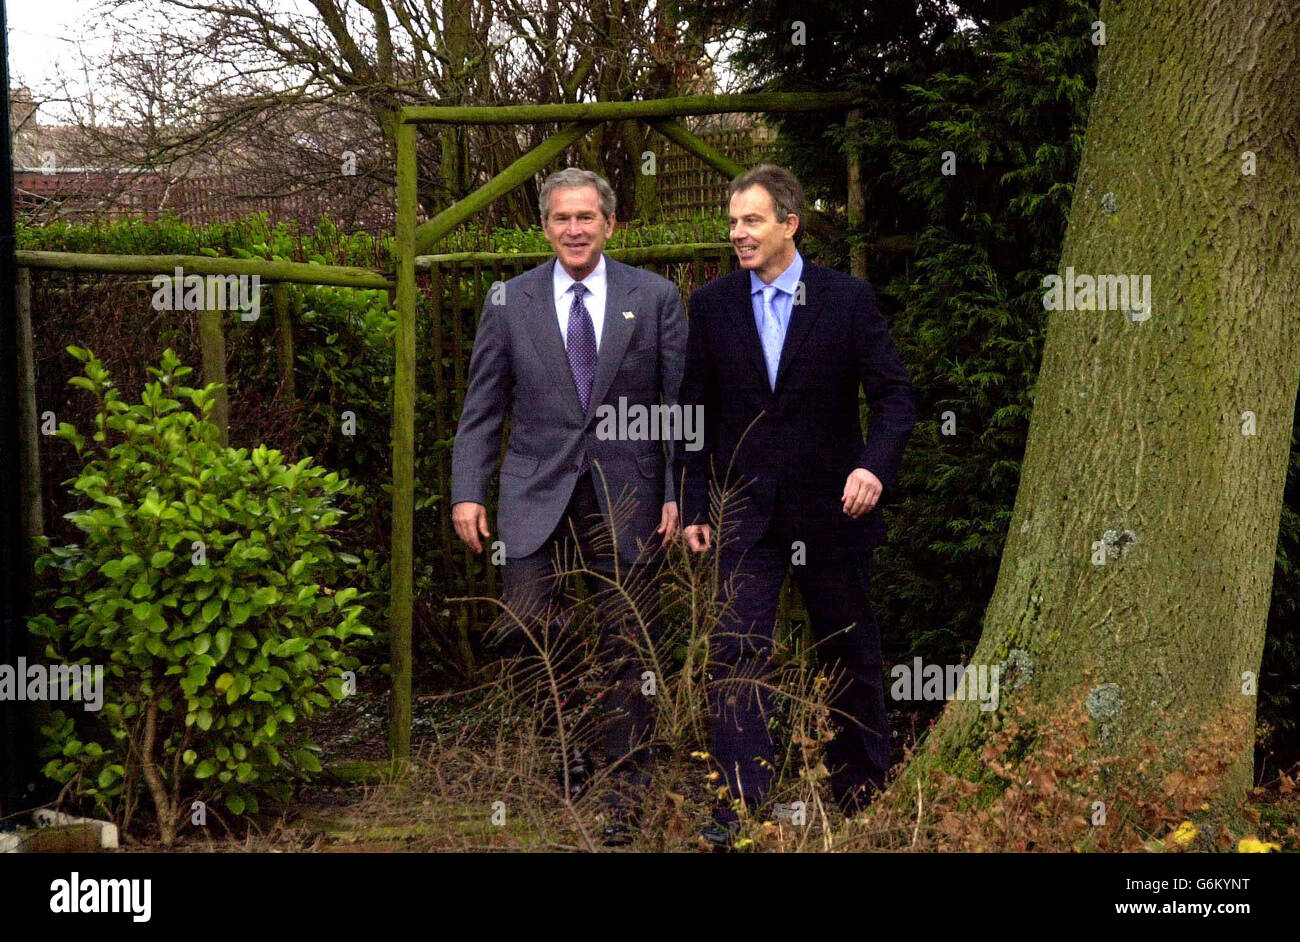 US President George Bush alongside Prime Minister Tony Blair at Myrobella House, his constituency home in Country Durham. It was understood that today's trip was designed to offer the chance for the Mr Blair and President Bush to spend time together in more relaxed conditions, following the high-profile speeches, political discussions and pageantry of the past two days. Stock Photo